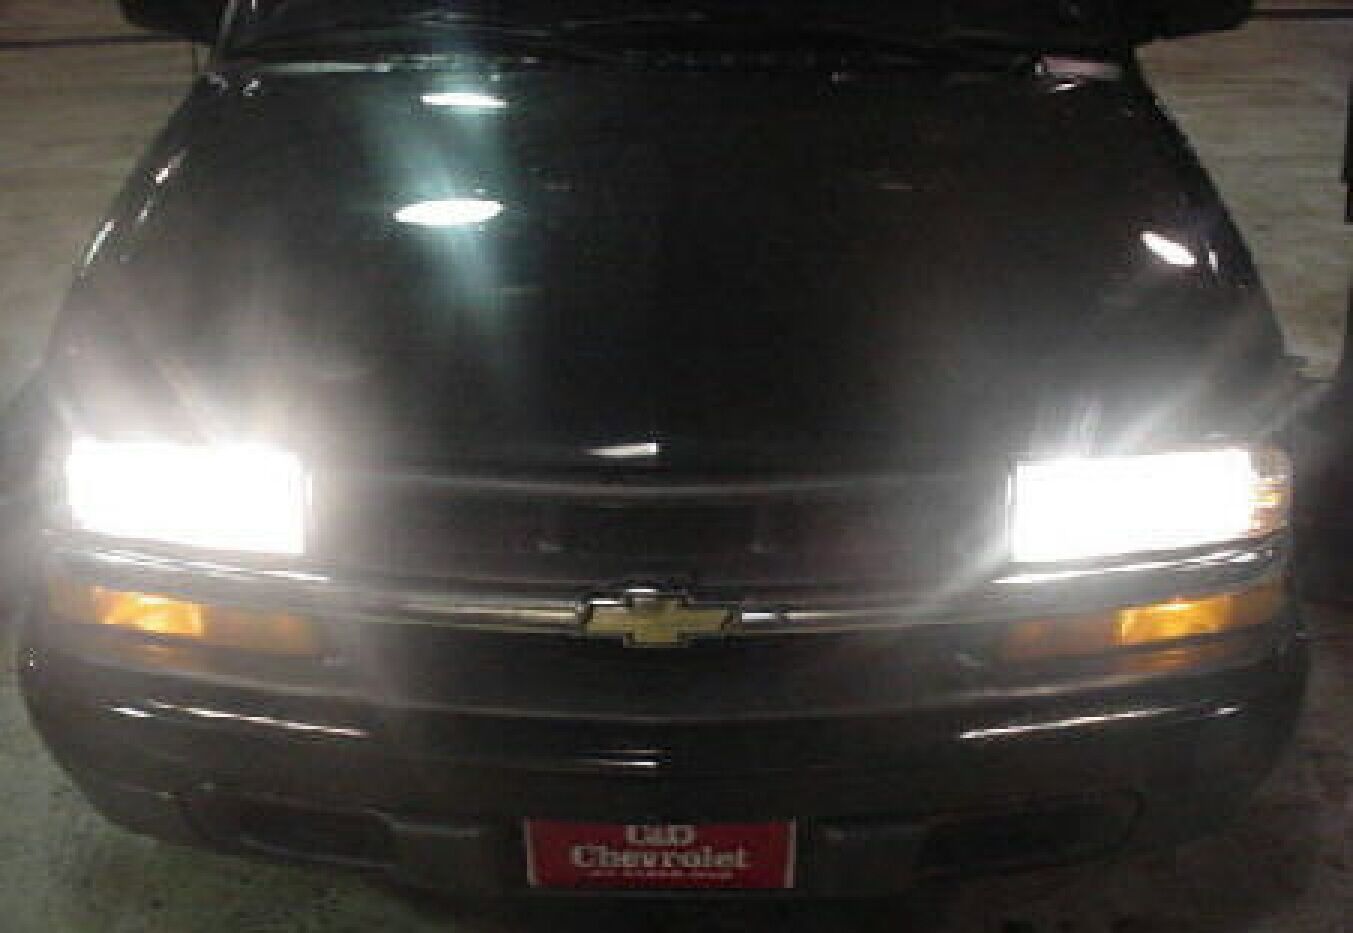 98 04 S10 Chevy GMC Sonoma Truck High Beam Kit, Turns Low Beams Back On W Highs